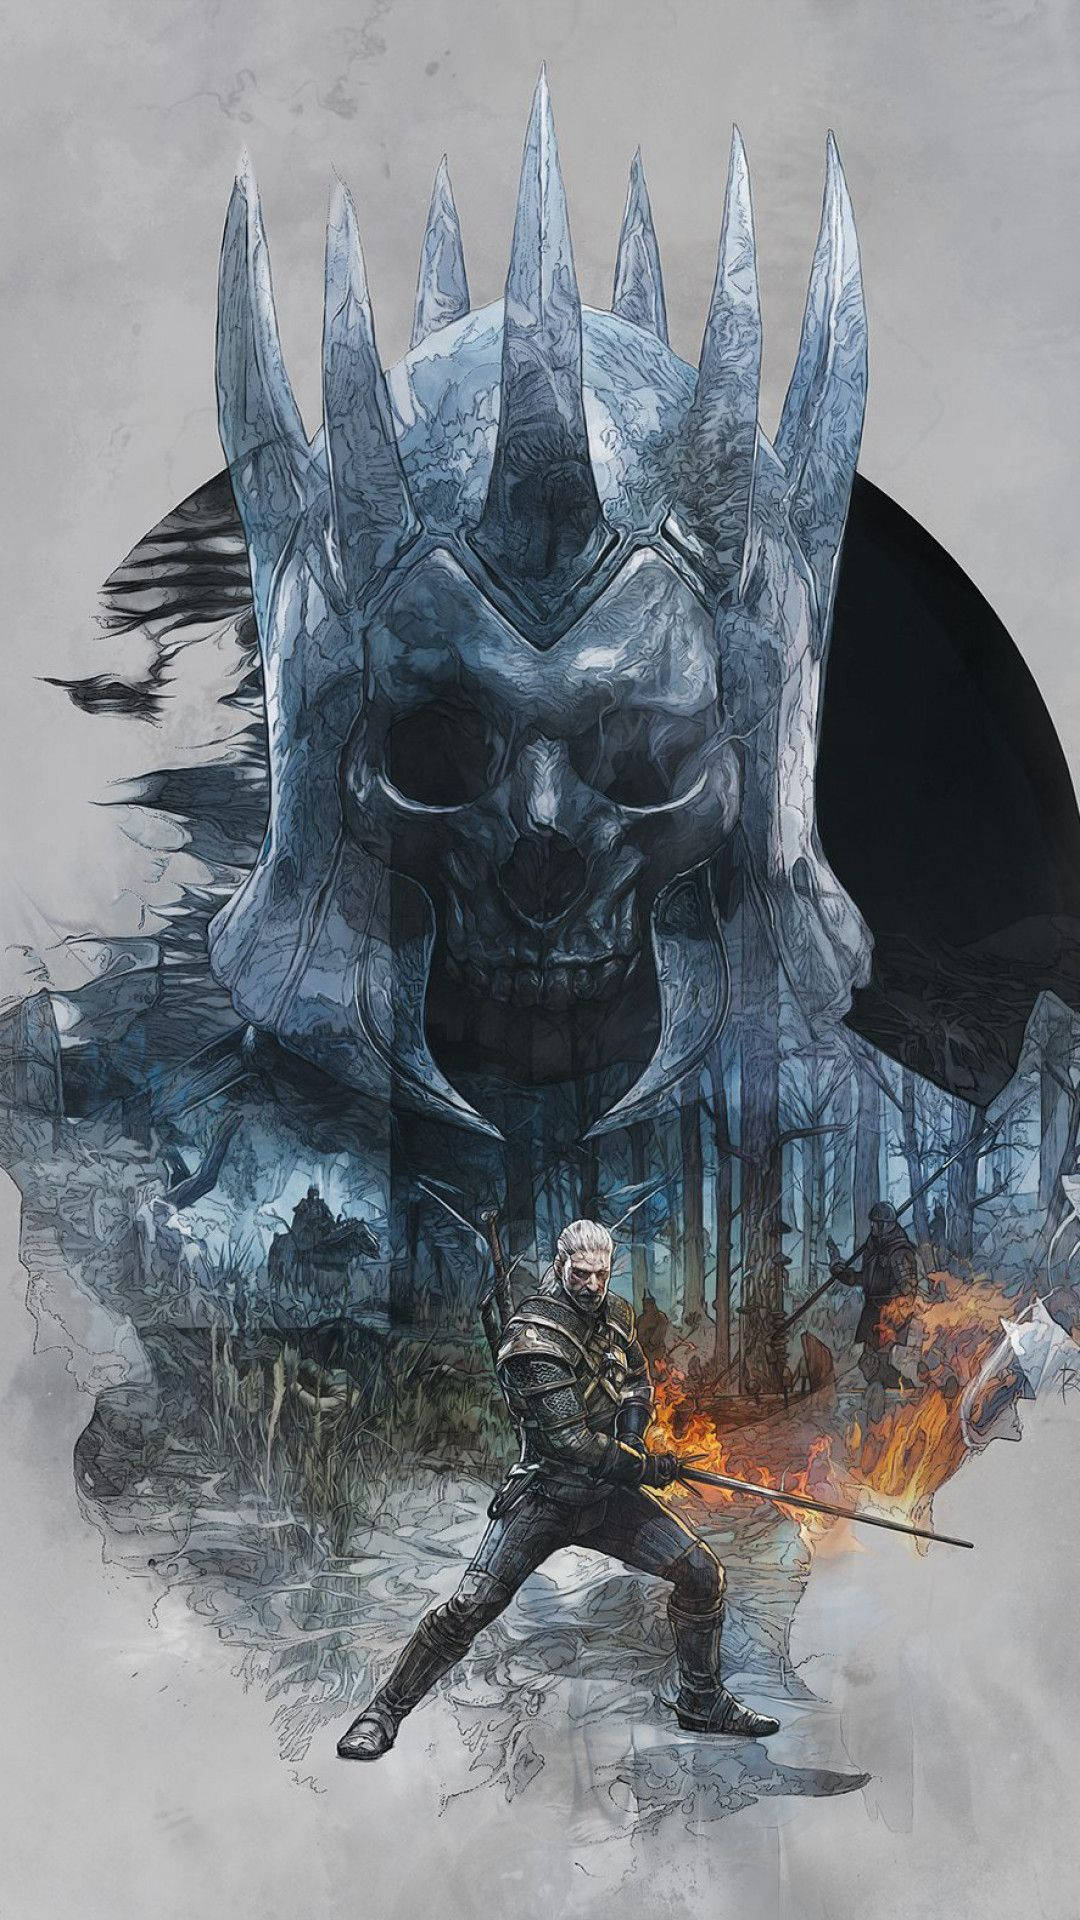 Free The Witcher Wallpaper Downloads, [100+] The Witcher Wallpapers for  FREE 